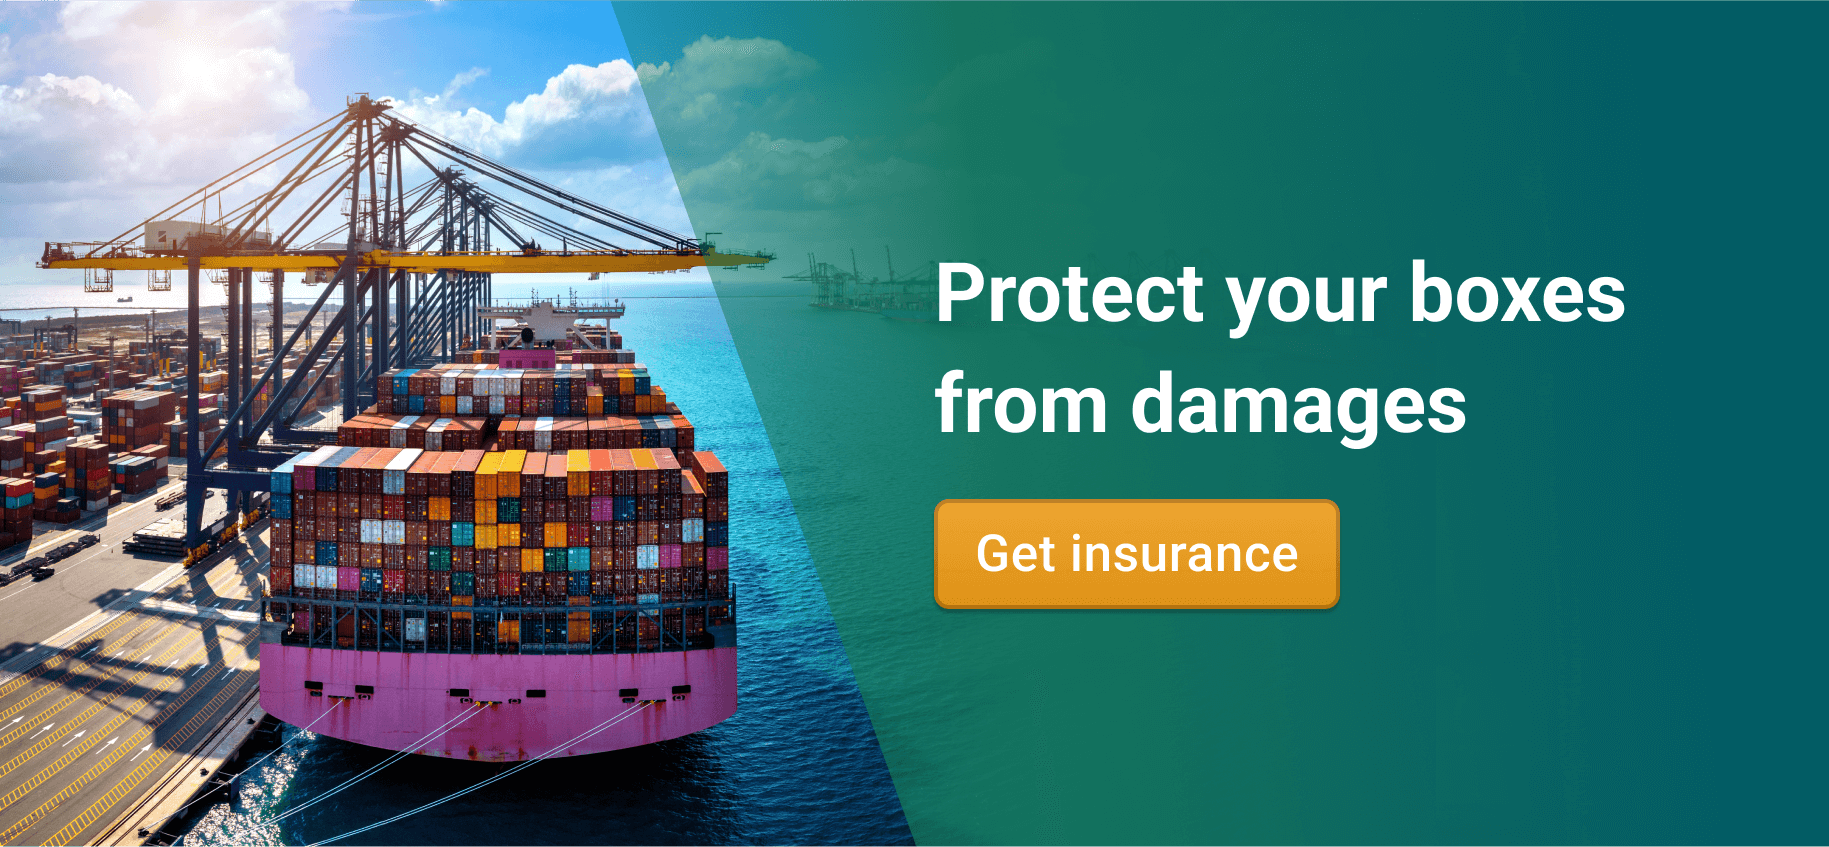 Protect your containers from damage 